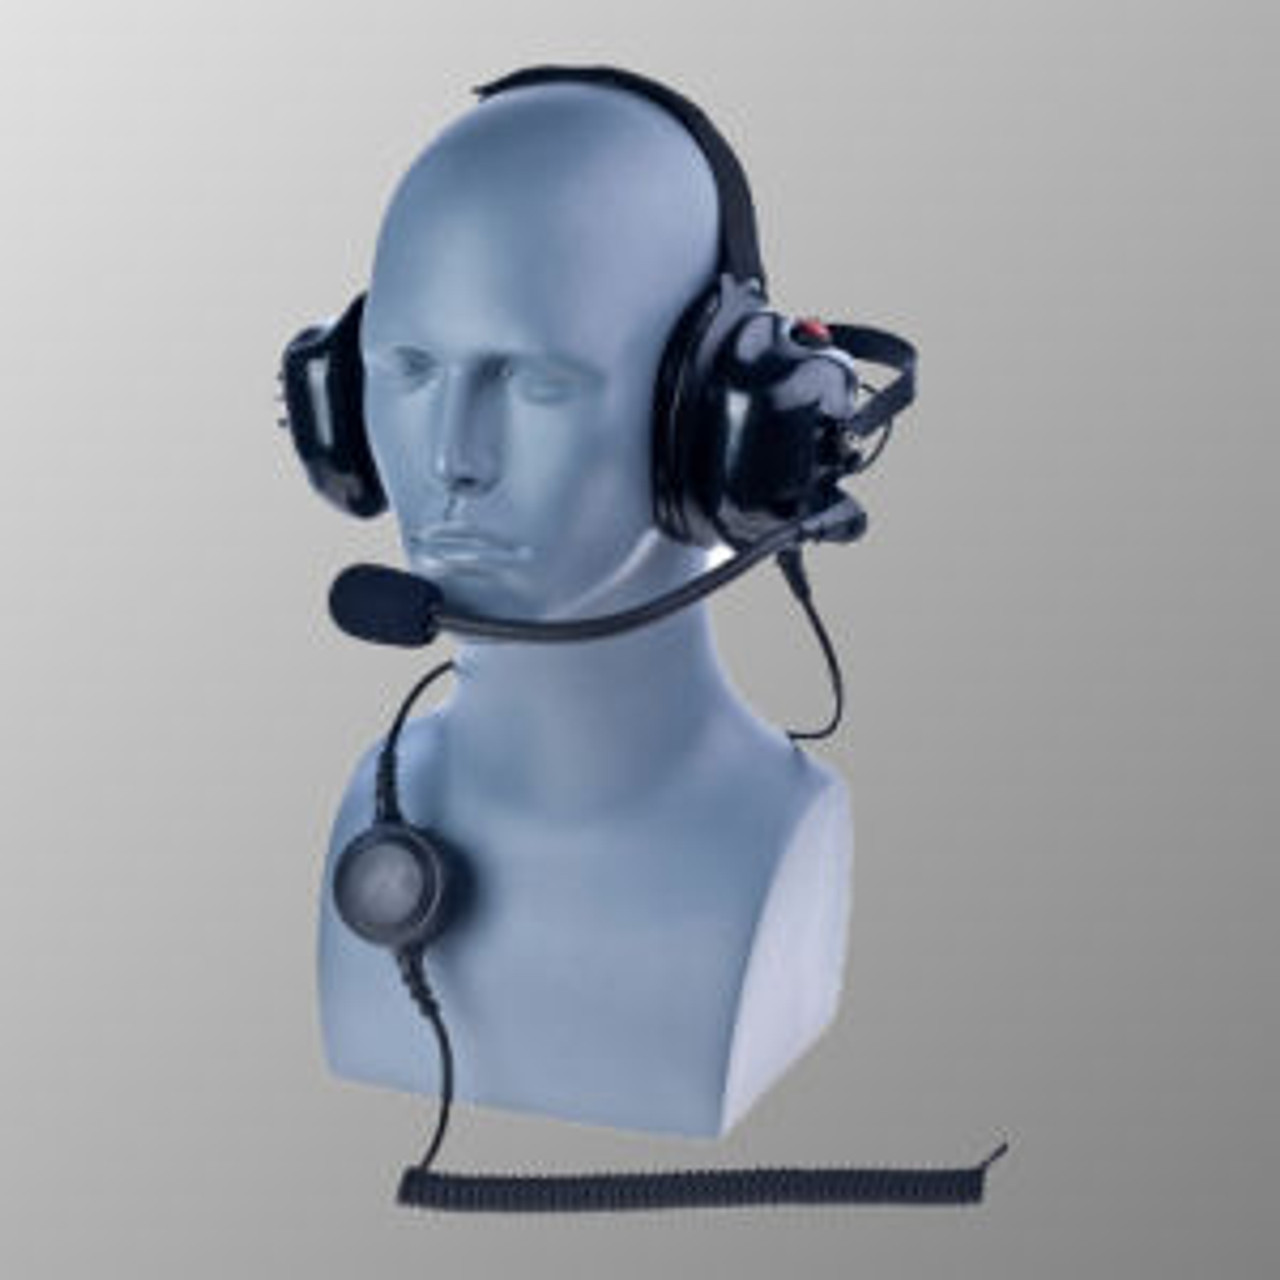 Kenwood TH-D74A Noise Canceling Behind The Head Double Muff Headset